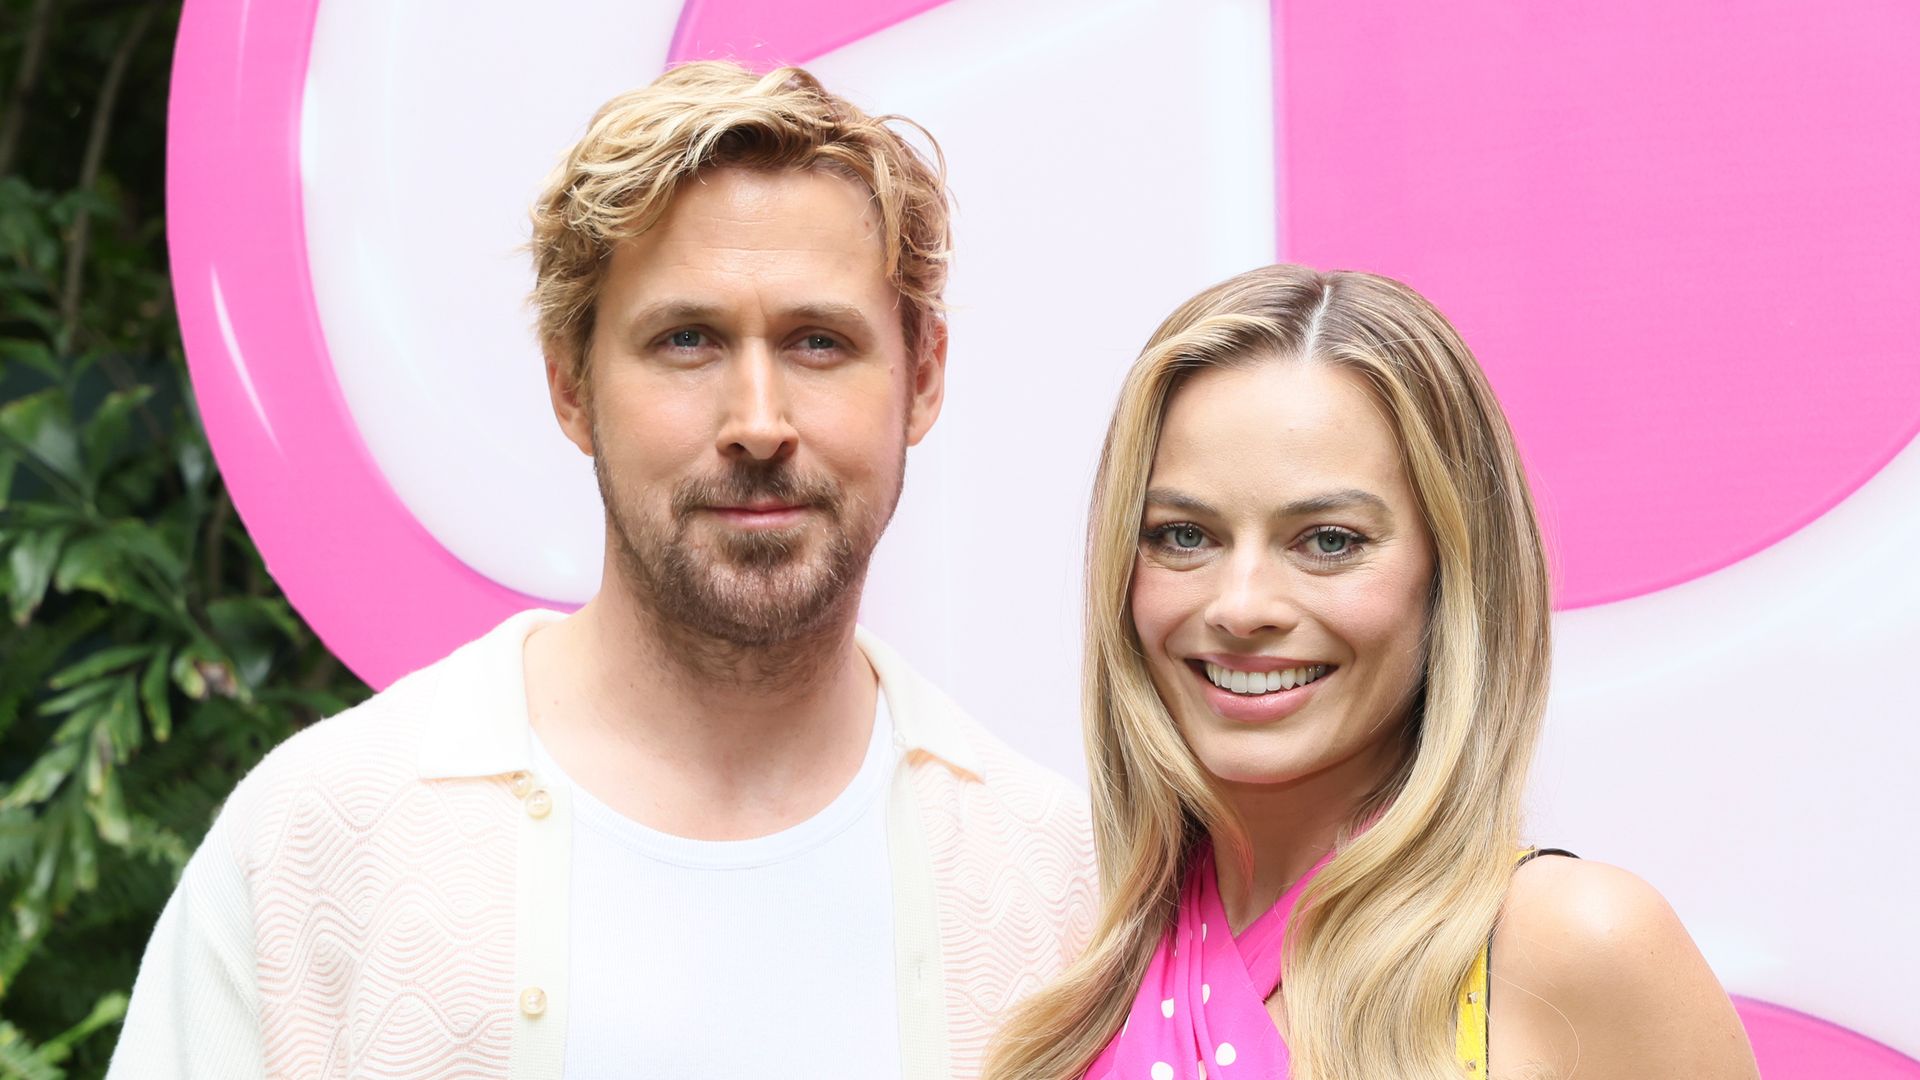 Ryan Gosling and Margot Robbie attend the press junket and photo call for "Barbie" at Four Seasons Hotel Los Angeles at Beverly Hills on June 25, 2023 in Los Angeles, California